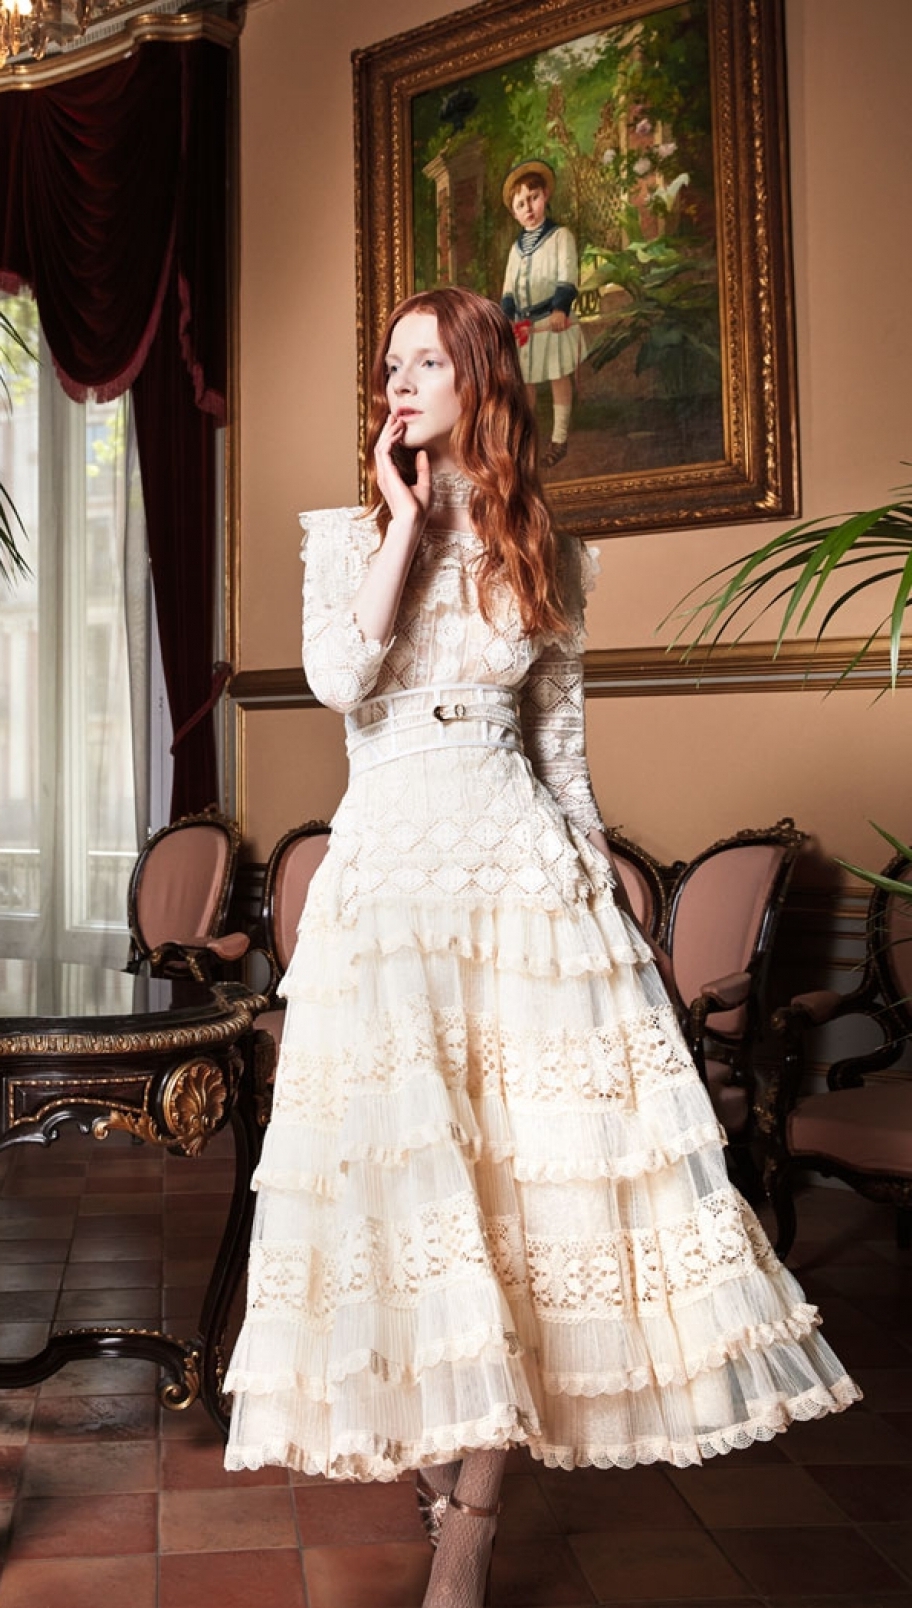 MADRONO wedding gown